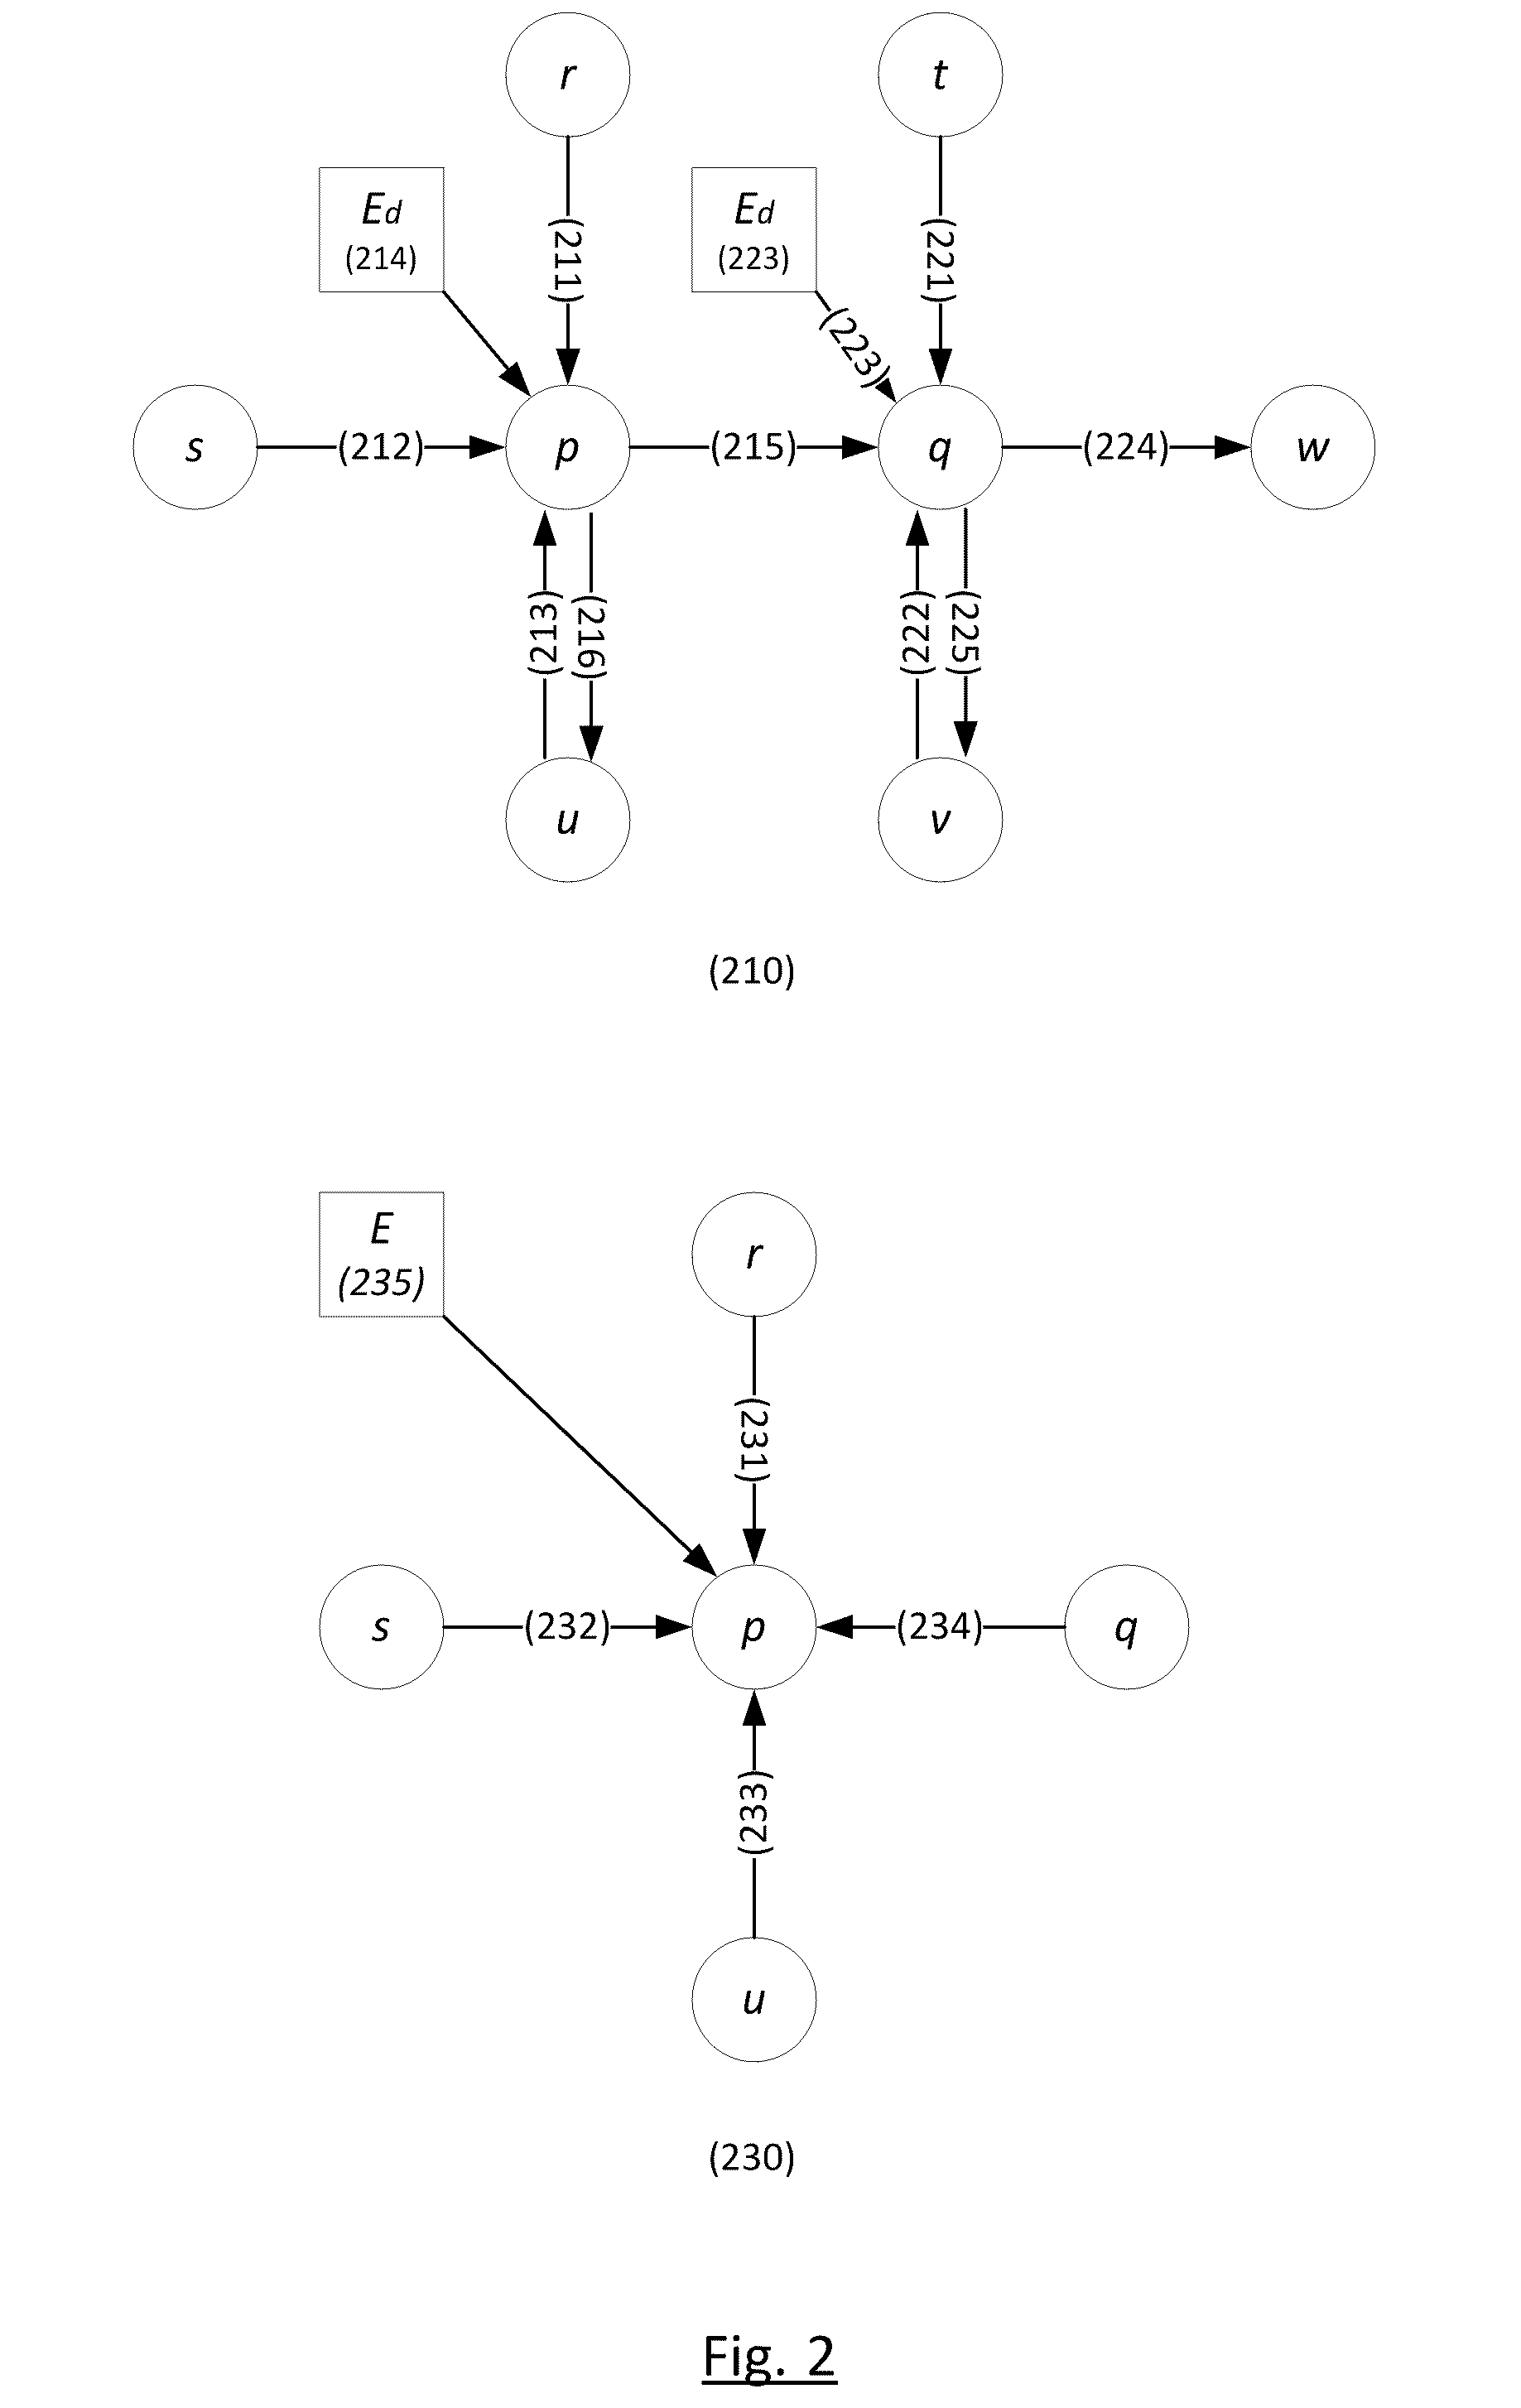 Stereo-Matching Processor Using Belief Propagation